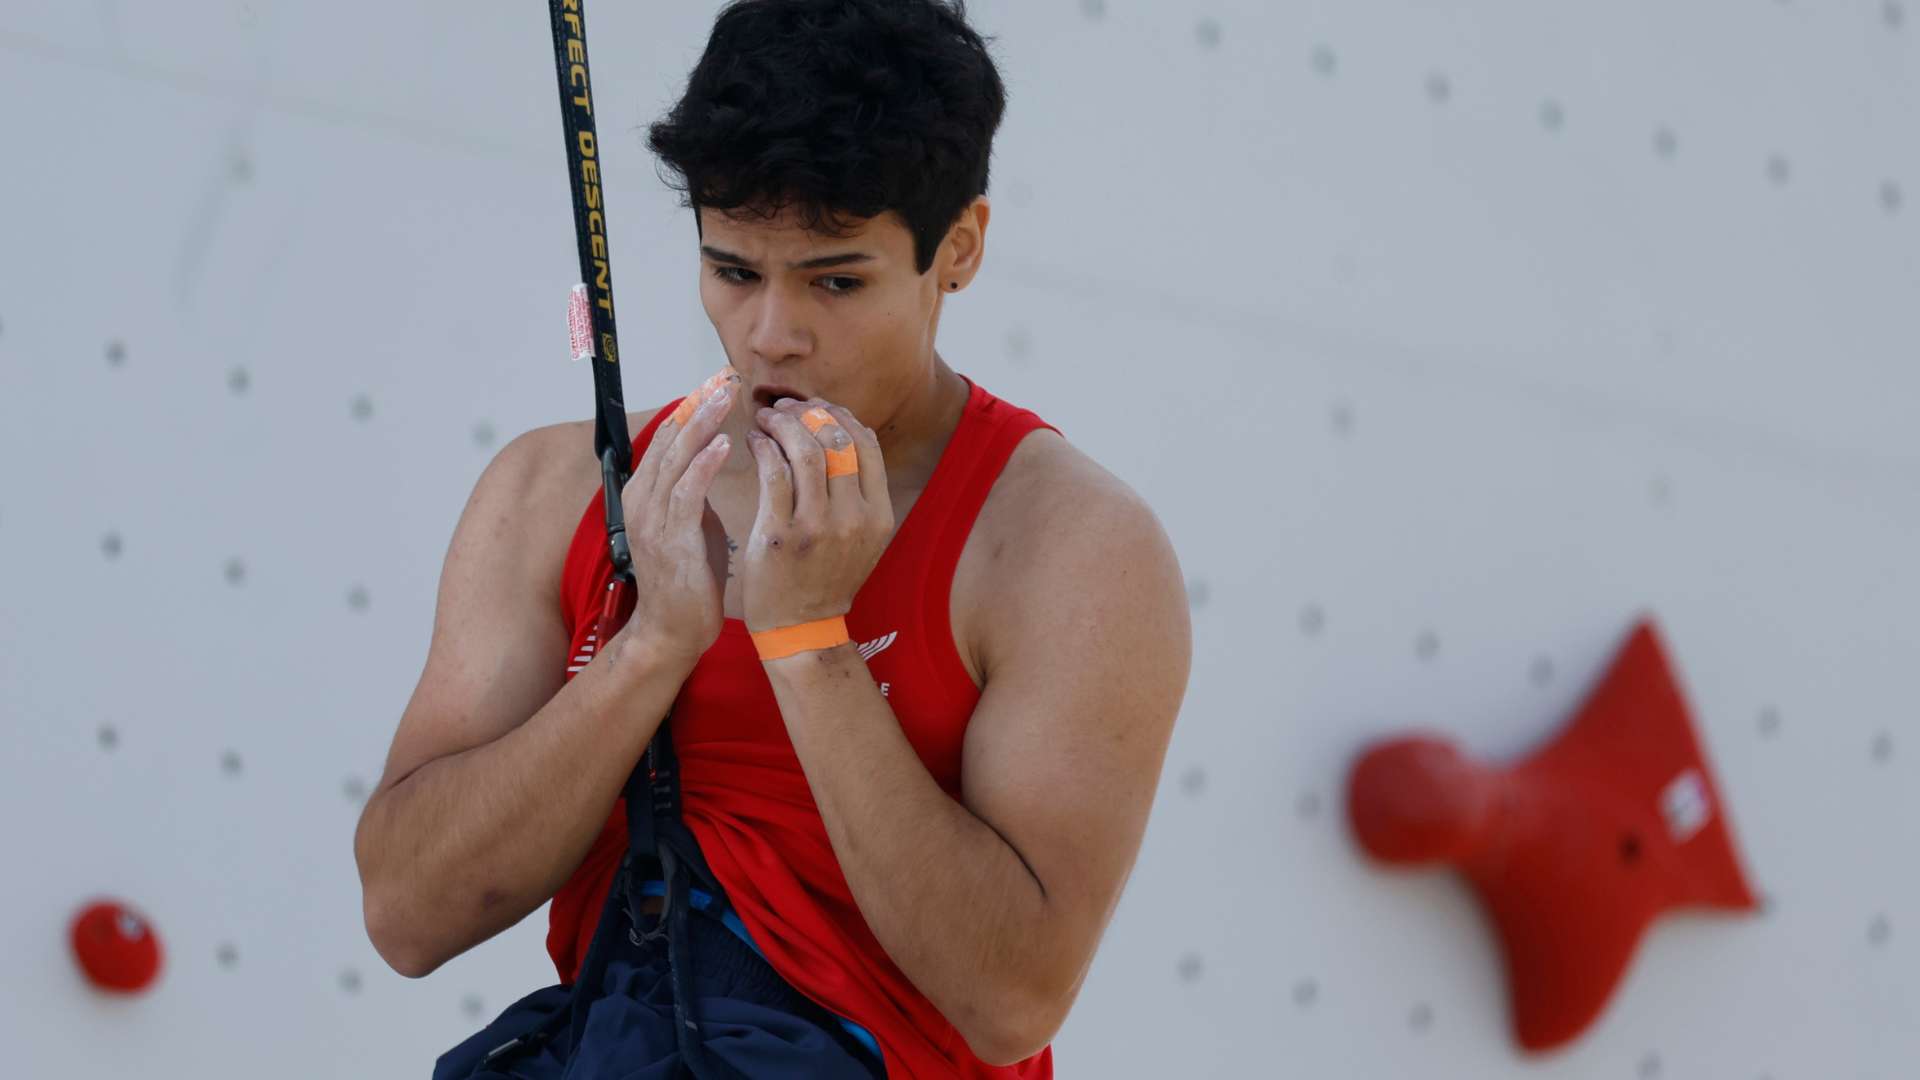 Climbing test event: Anahi Riveros and Joaquín Tapia were the fastest in the speed preliminaries